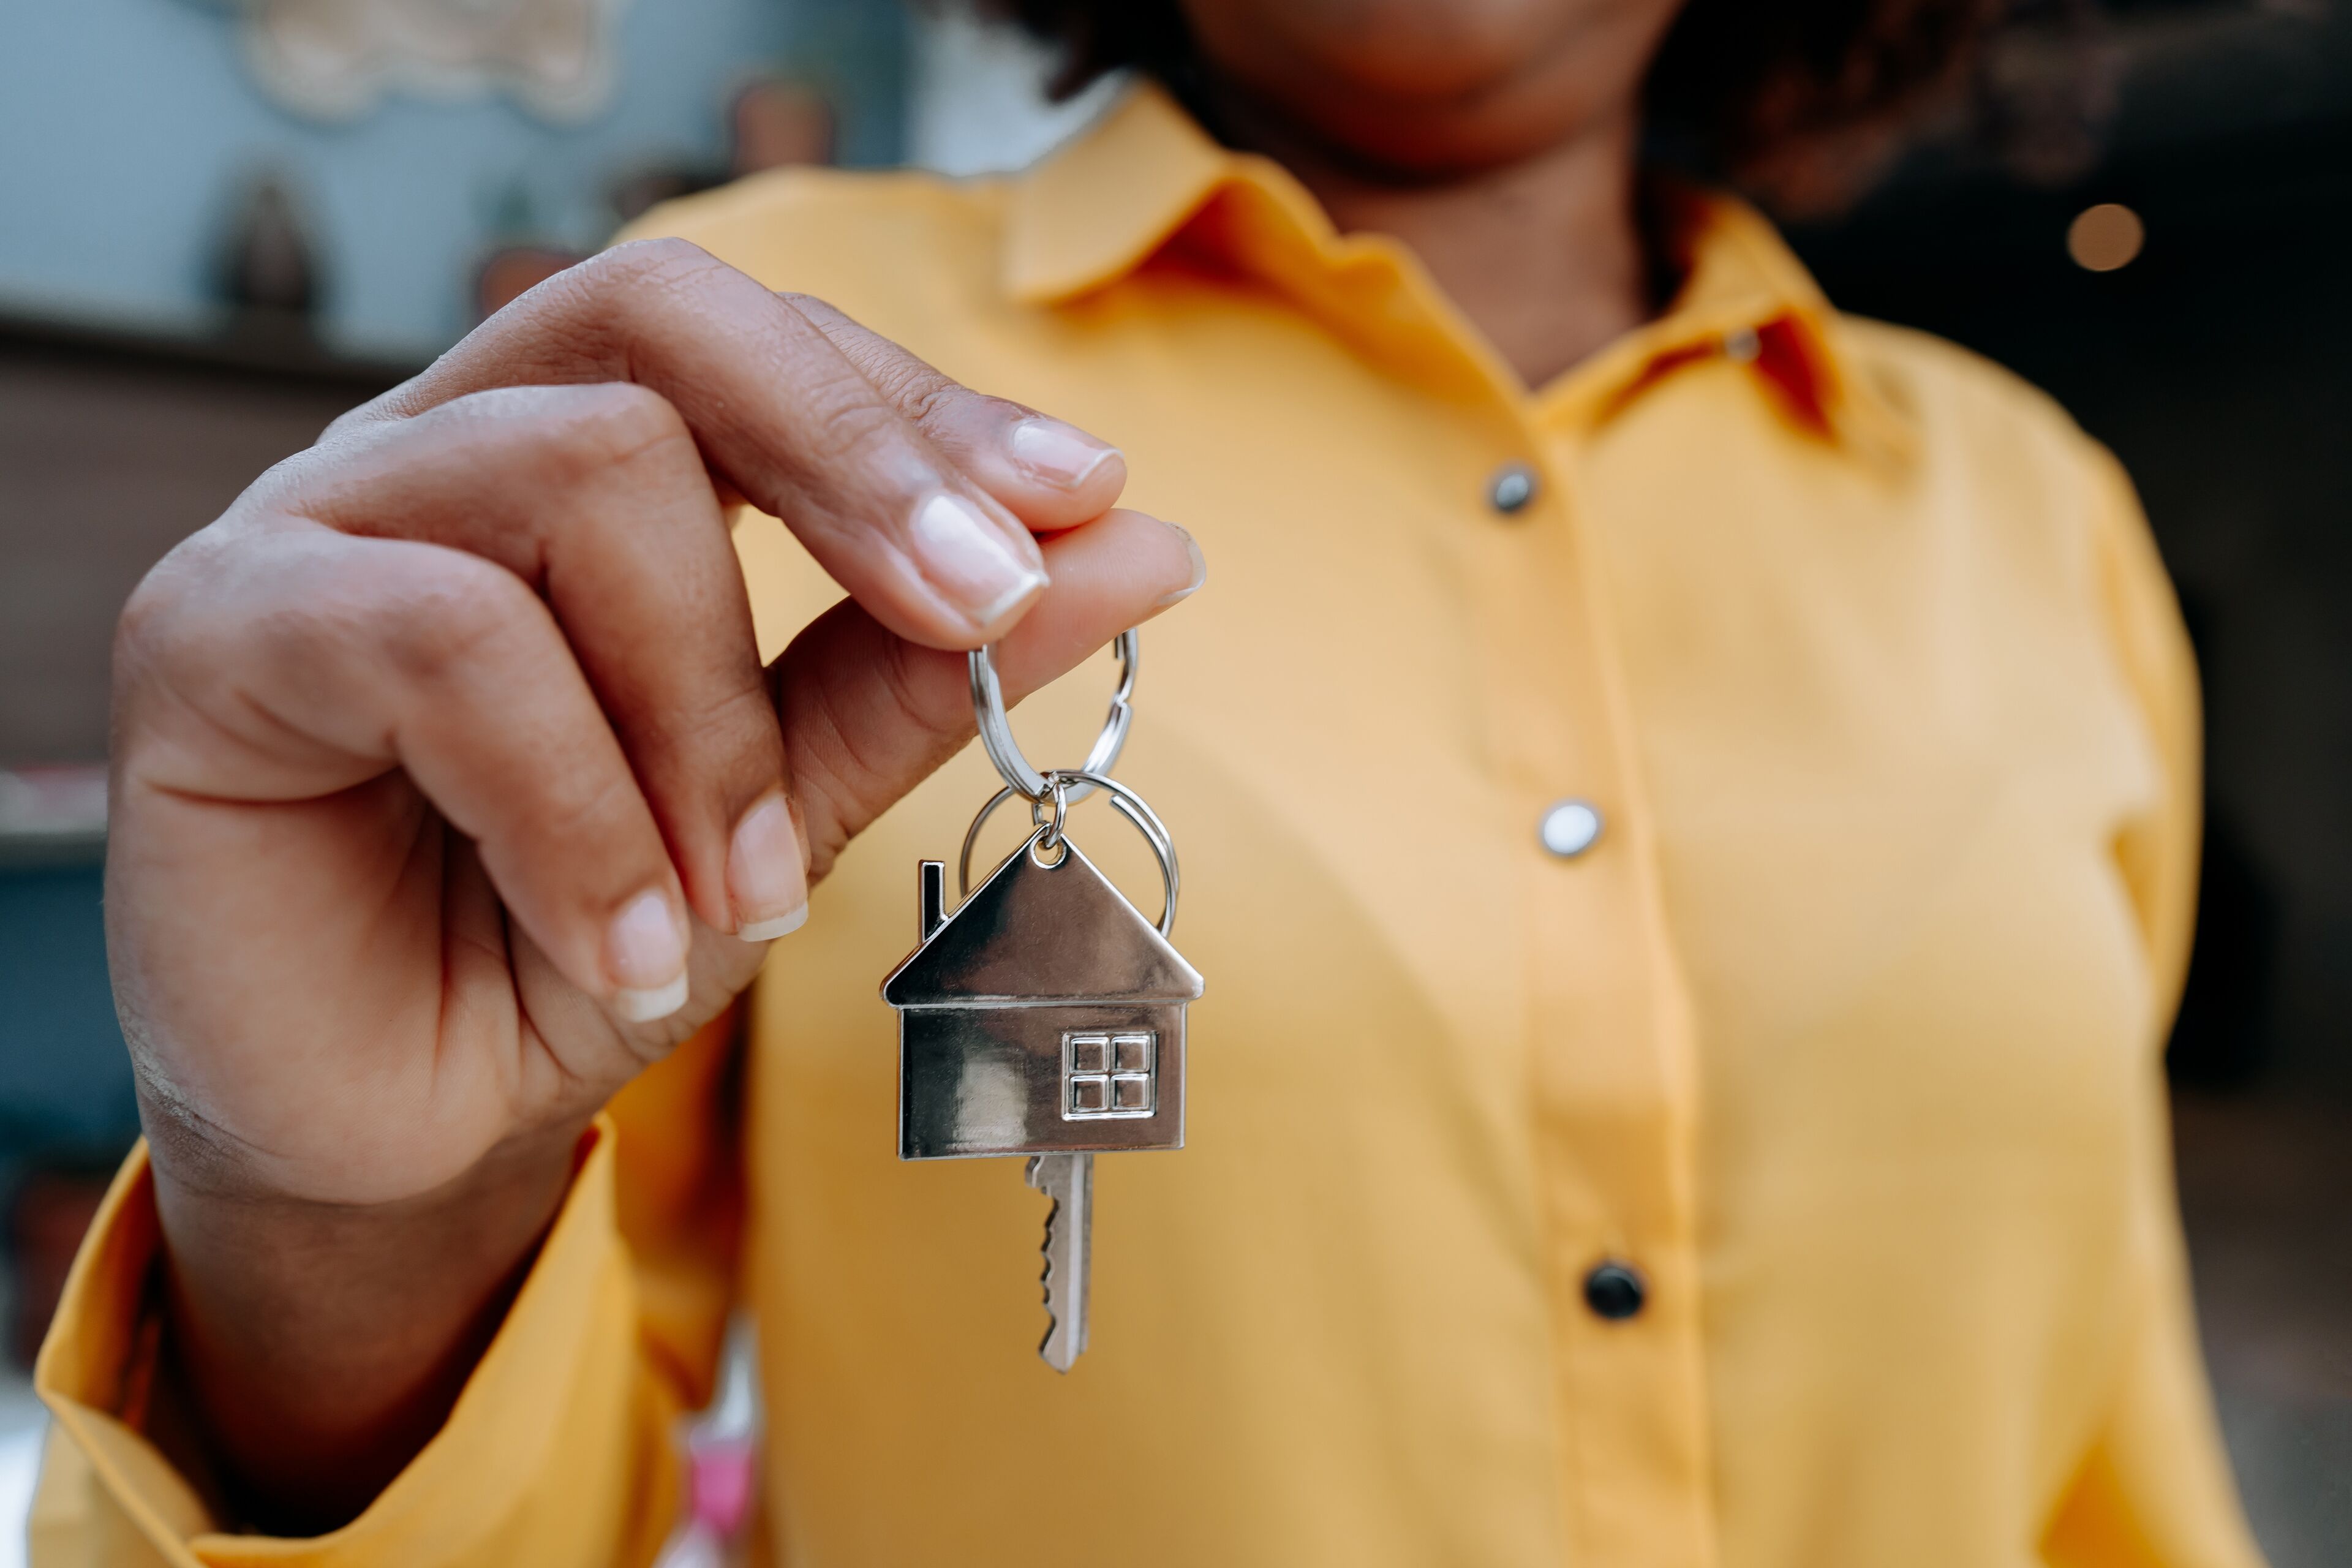 ImageA close-up of a person's hand presenting a key with a house-shaped keychain, symbolizing new homeownership.